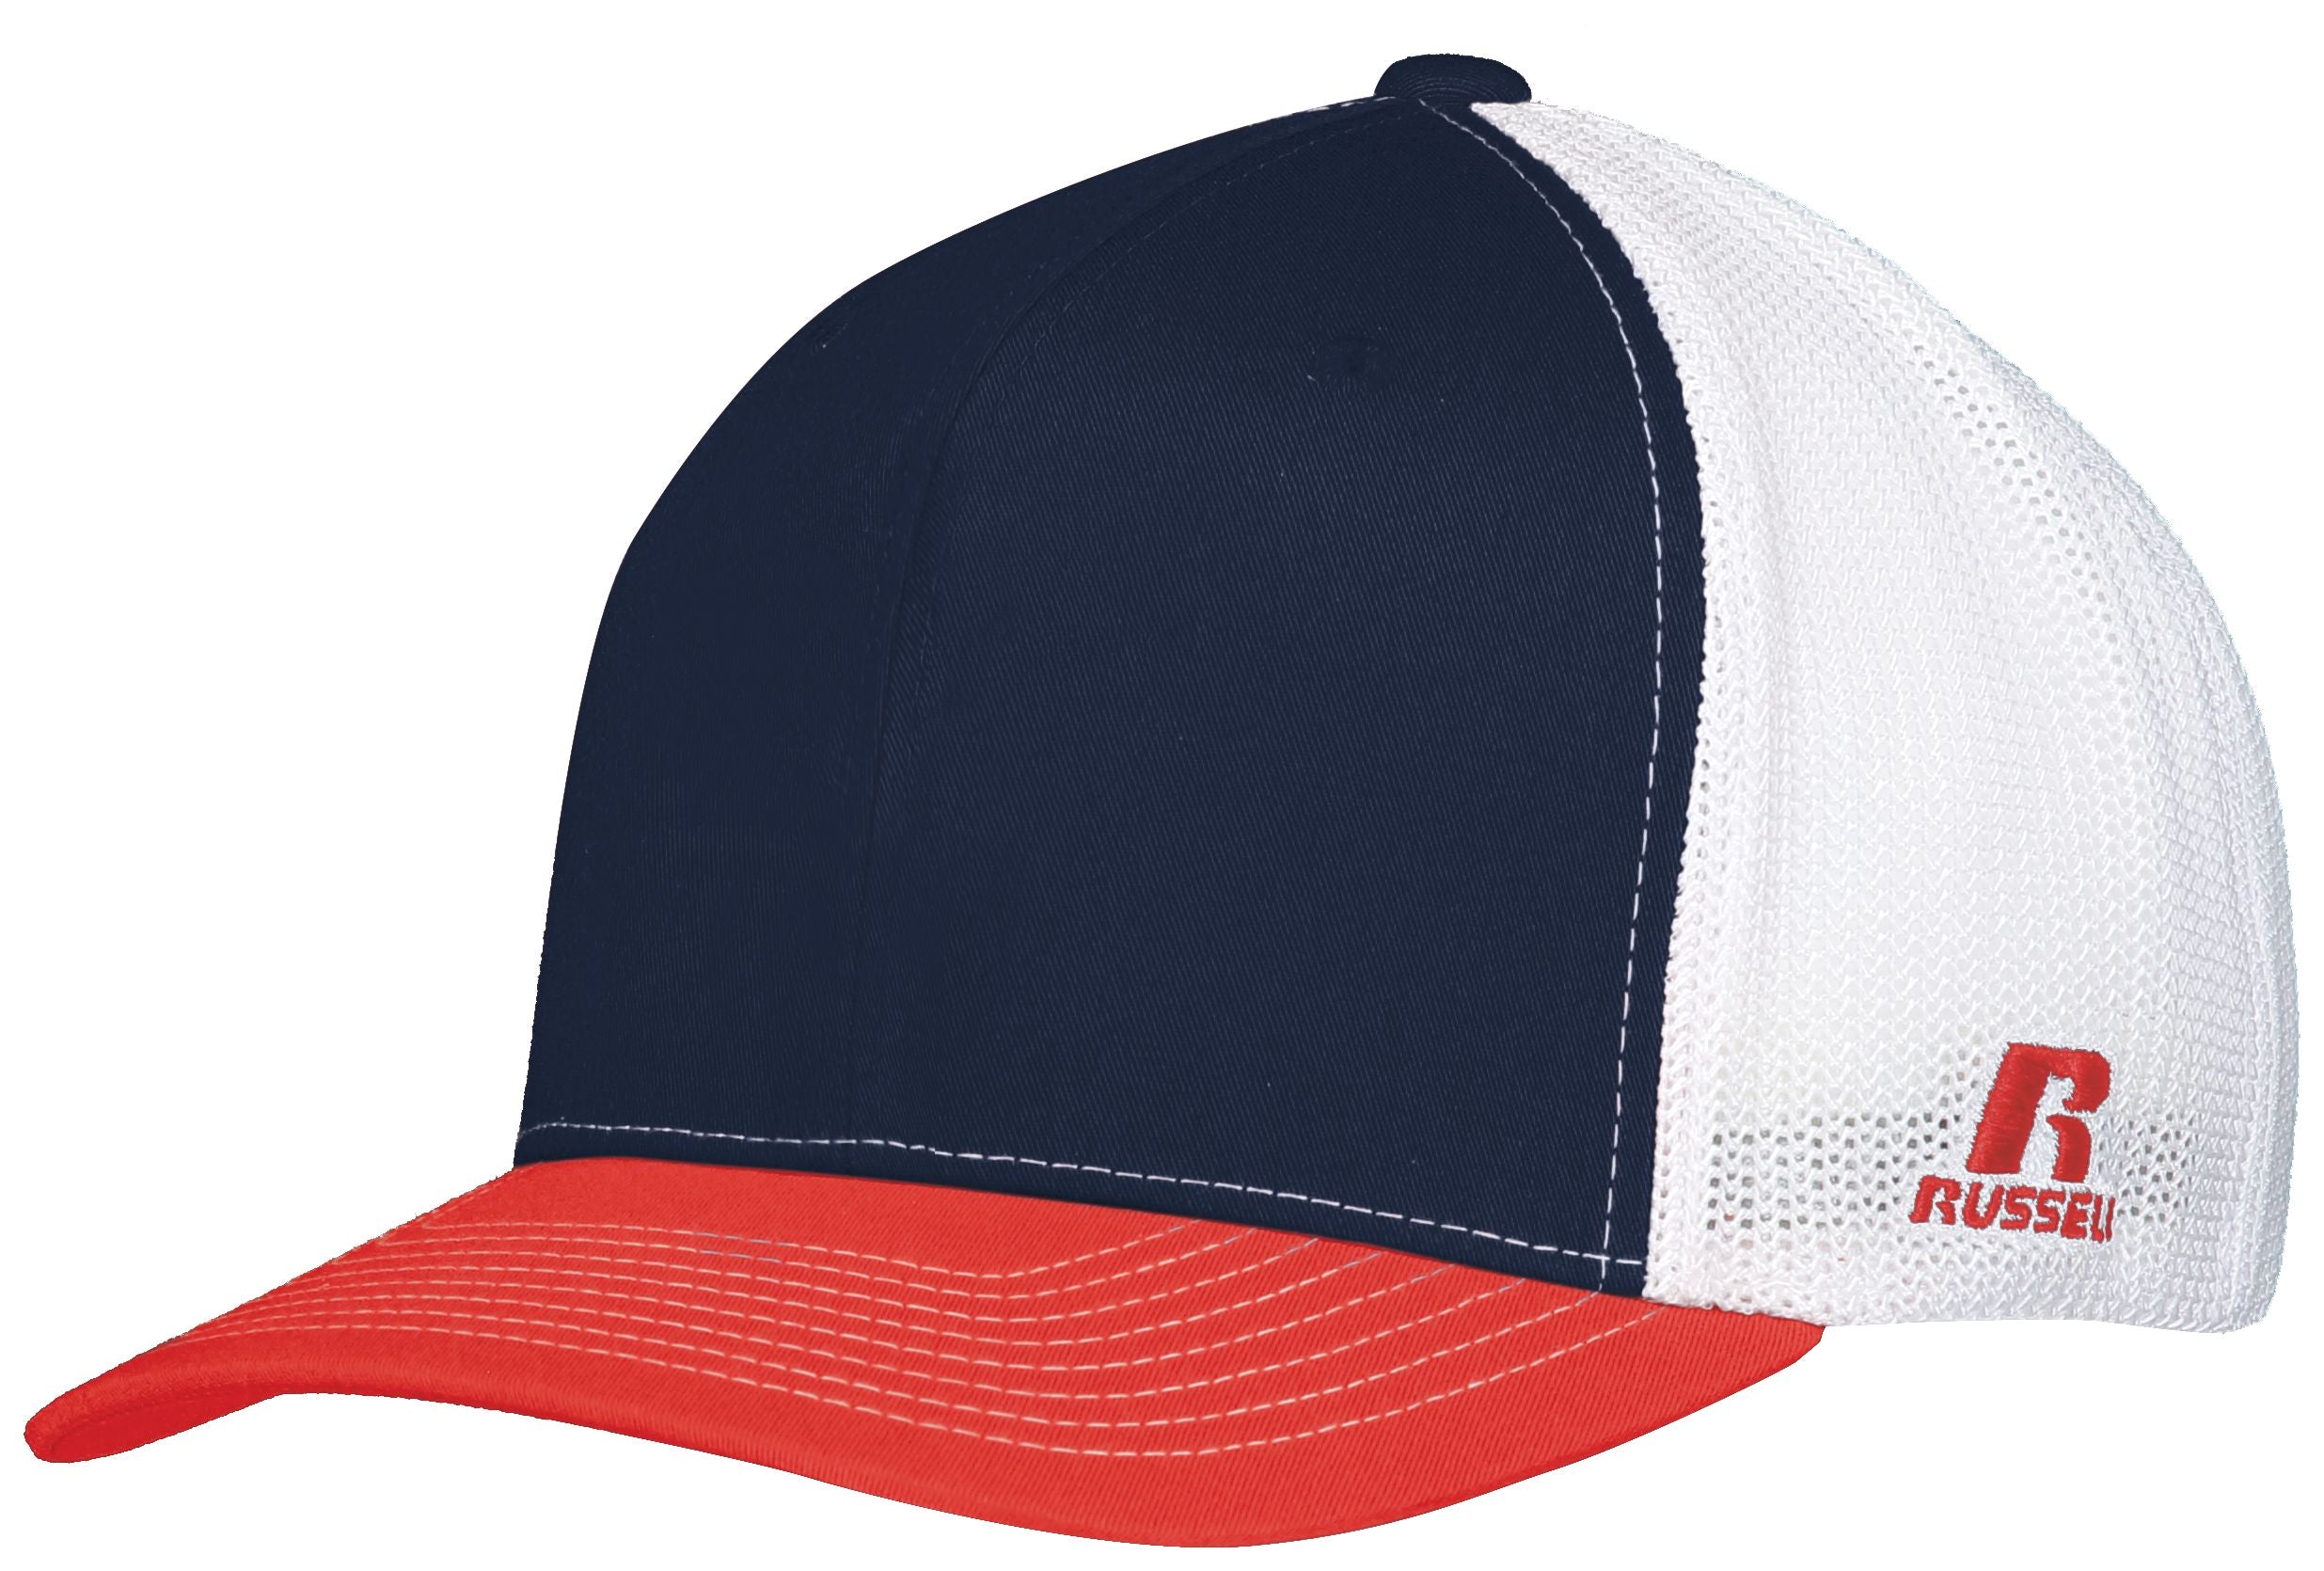 Russell Athletic Flexfit Twill Mesh Cap in Navy/True Red/White  -Part of the Adult, Headwear, Headwear-Cap, Russell-Athletic-Products product lines at KanaleyCreations.com